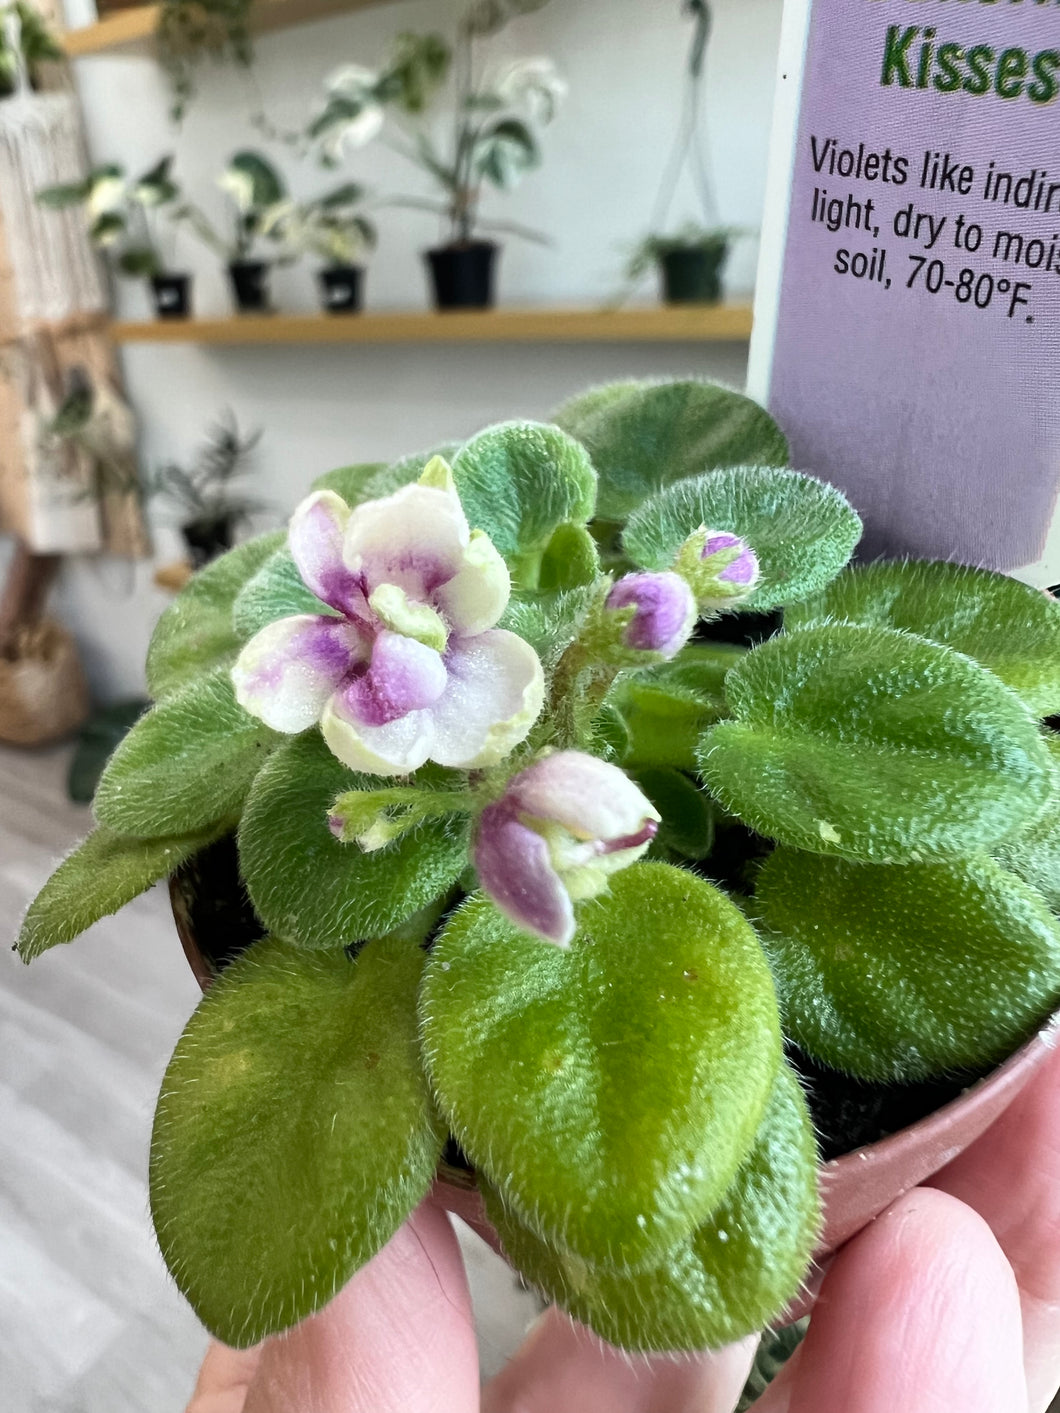 Mini African Violet “Hunter’s Butterfly Kisses“